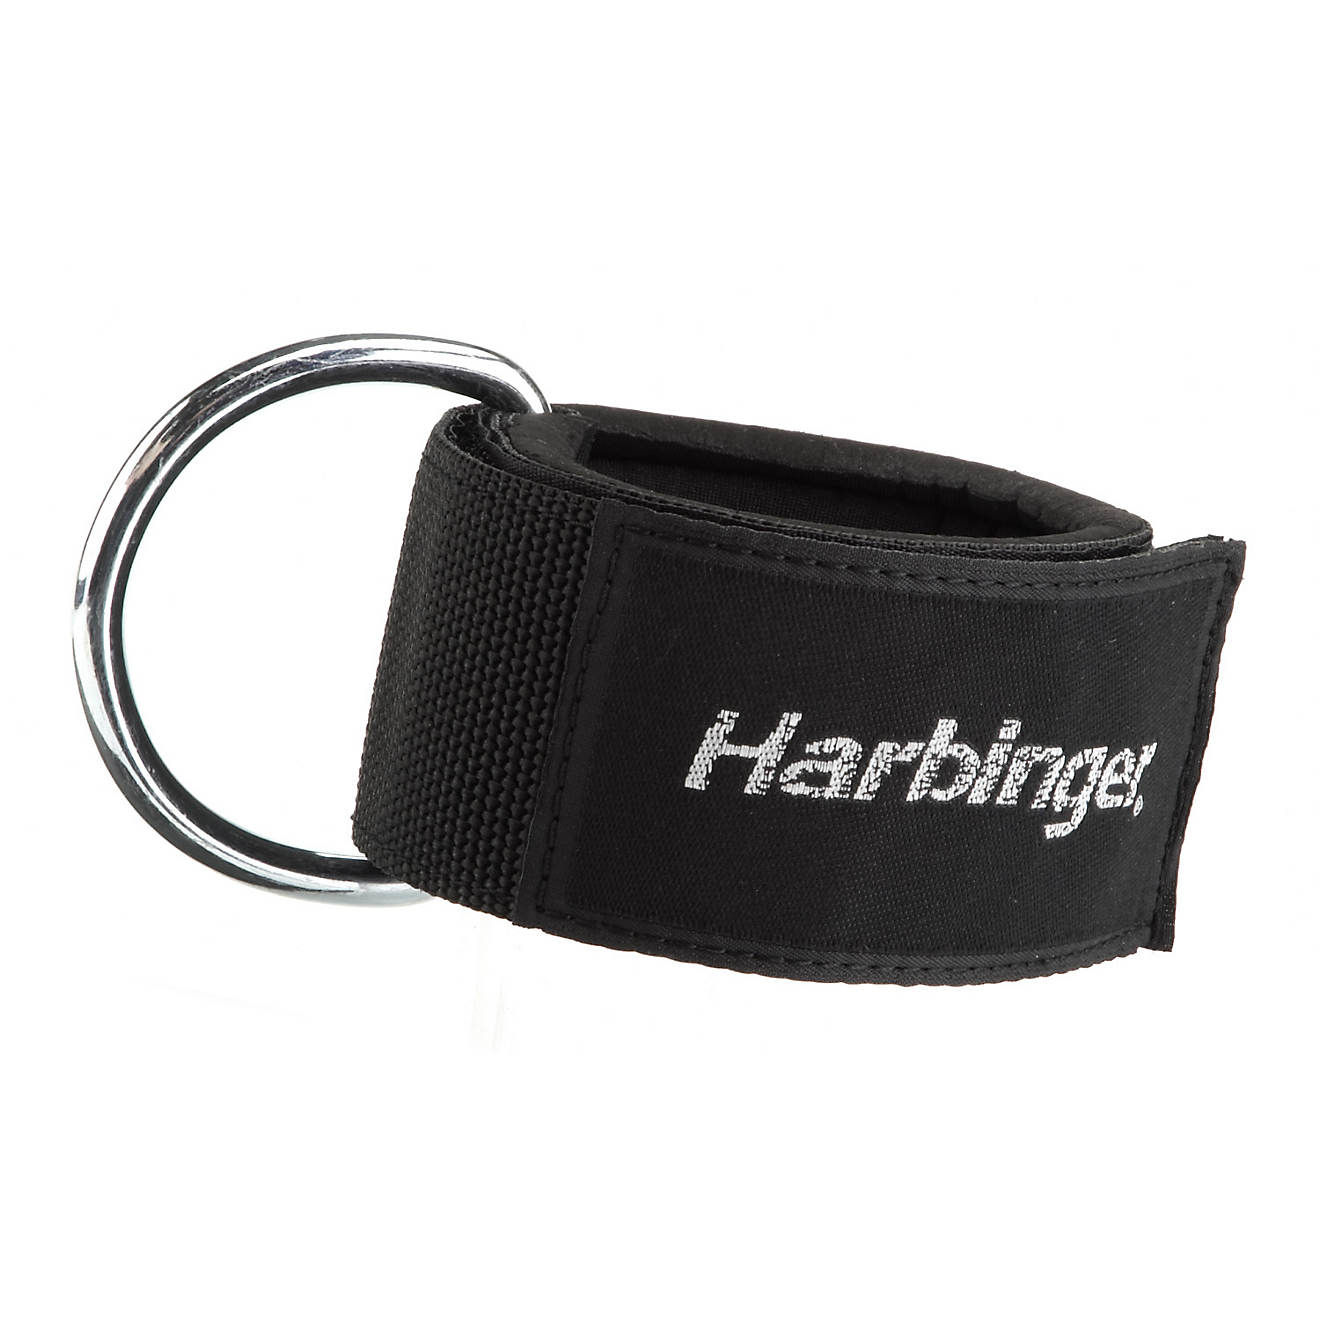 Harbinger Padded Ankle Strap Weight Lifting Cable Attachment 